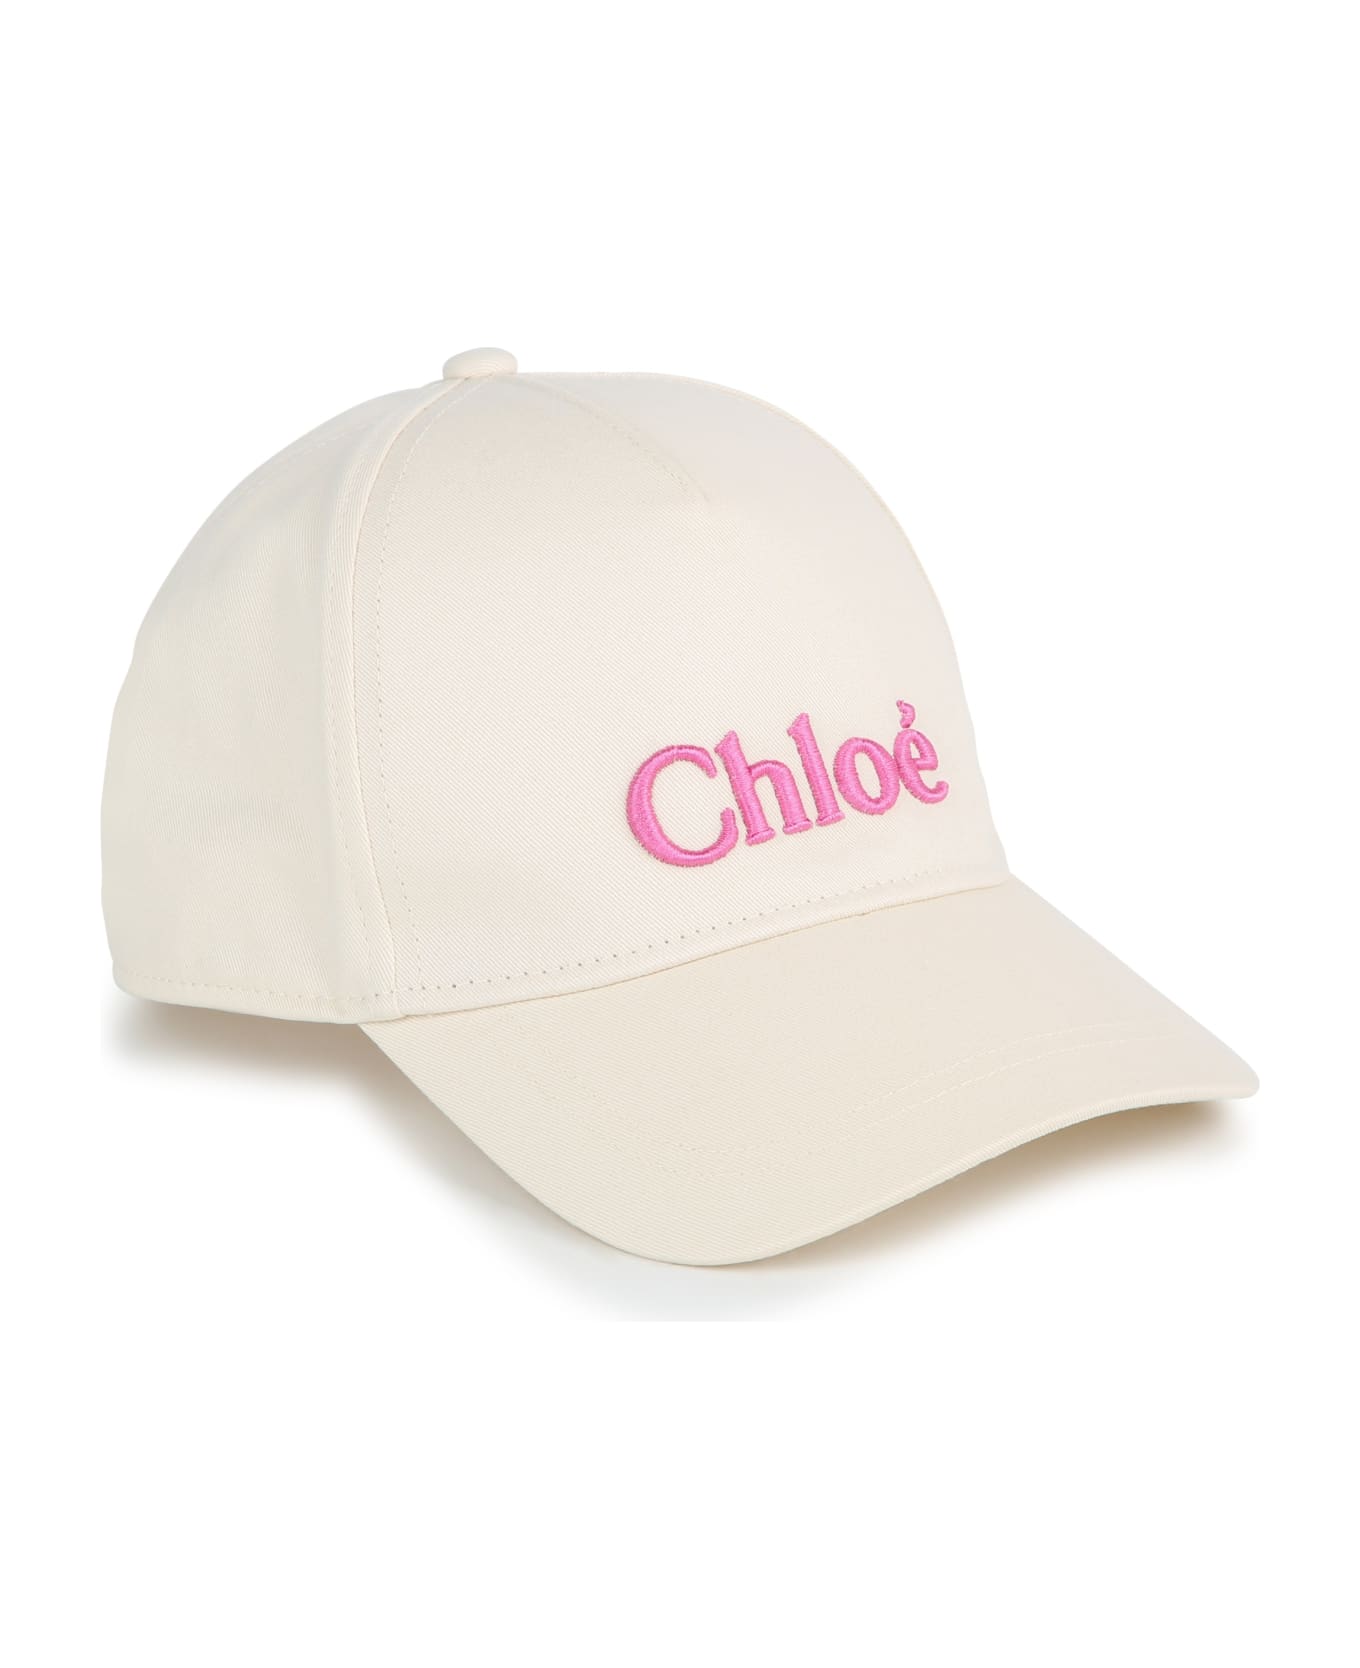 Chloé Baseball Hat With Embroidery - White